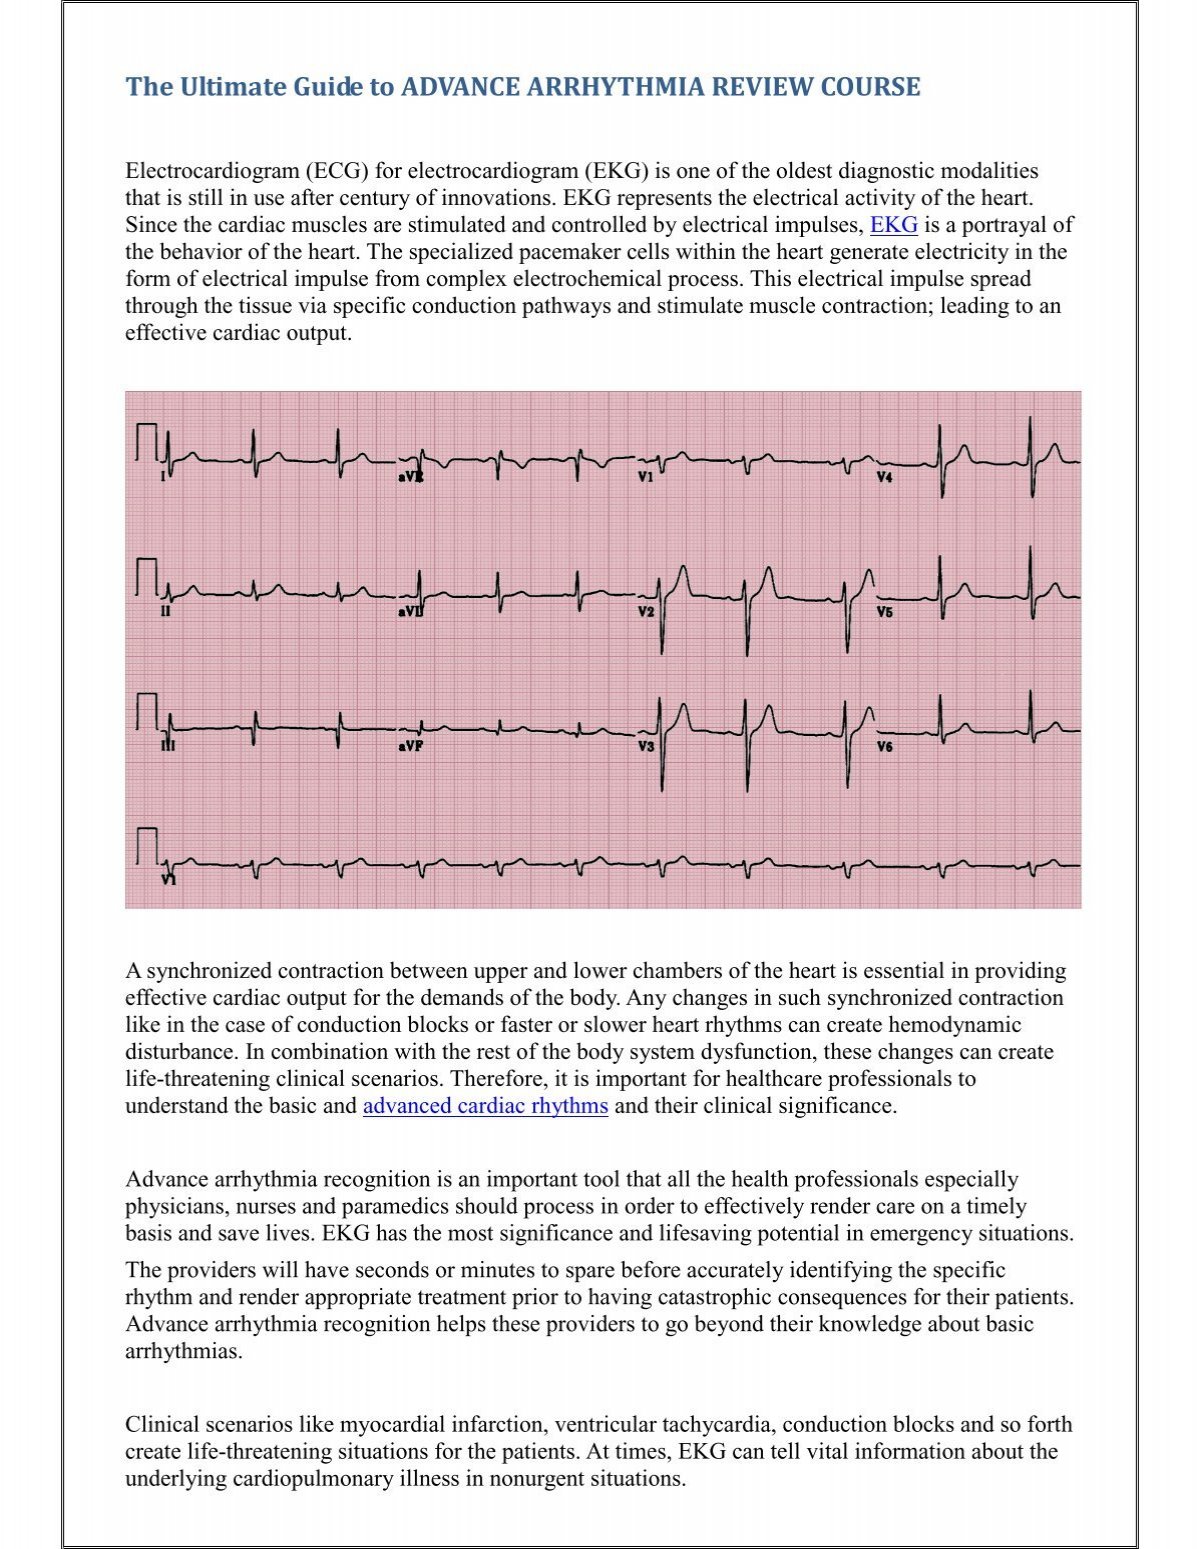 The Ultimate Guide To ADVANCE ARRHYTHMIA REVIEW COURSE